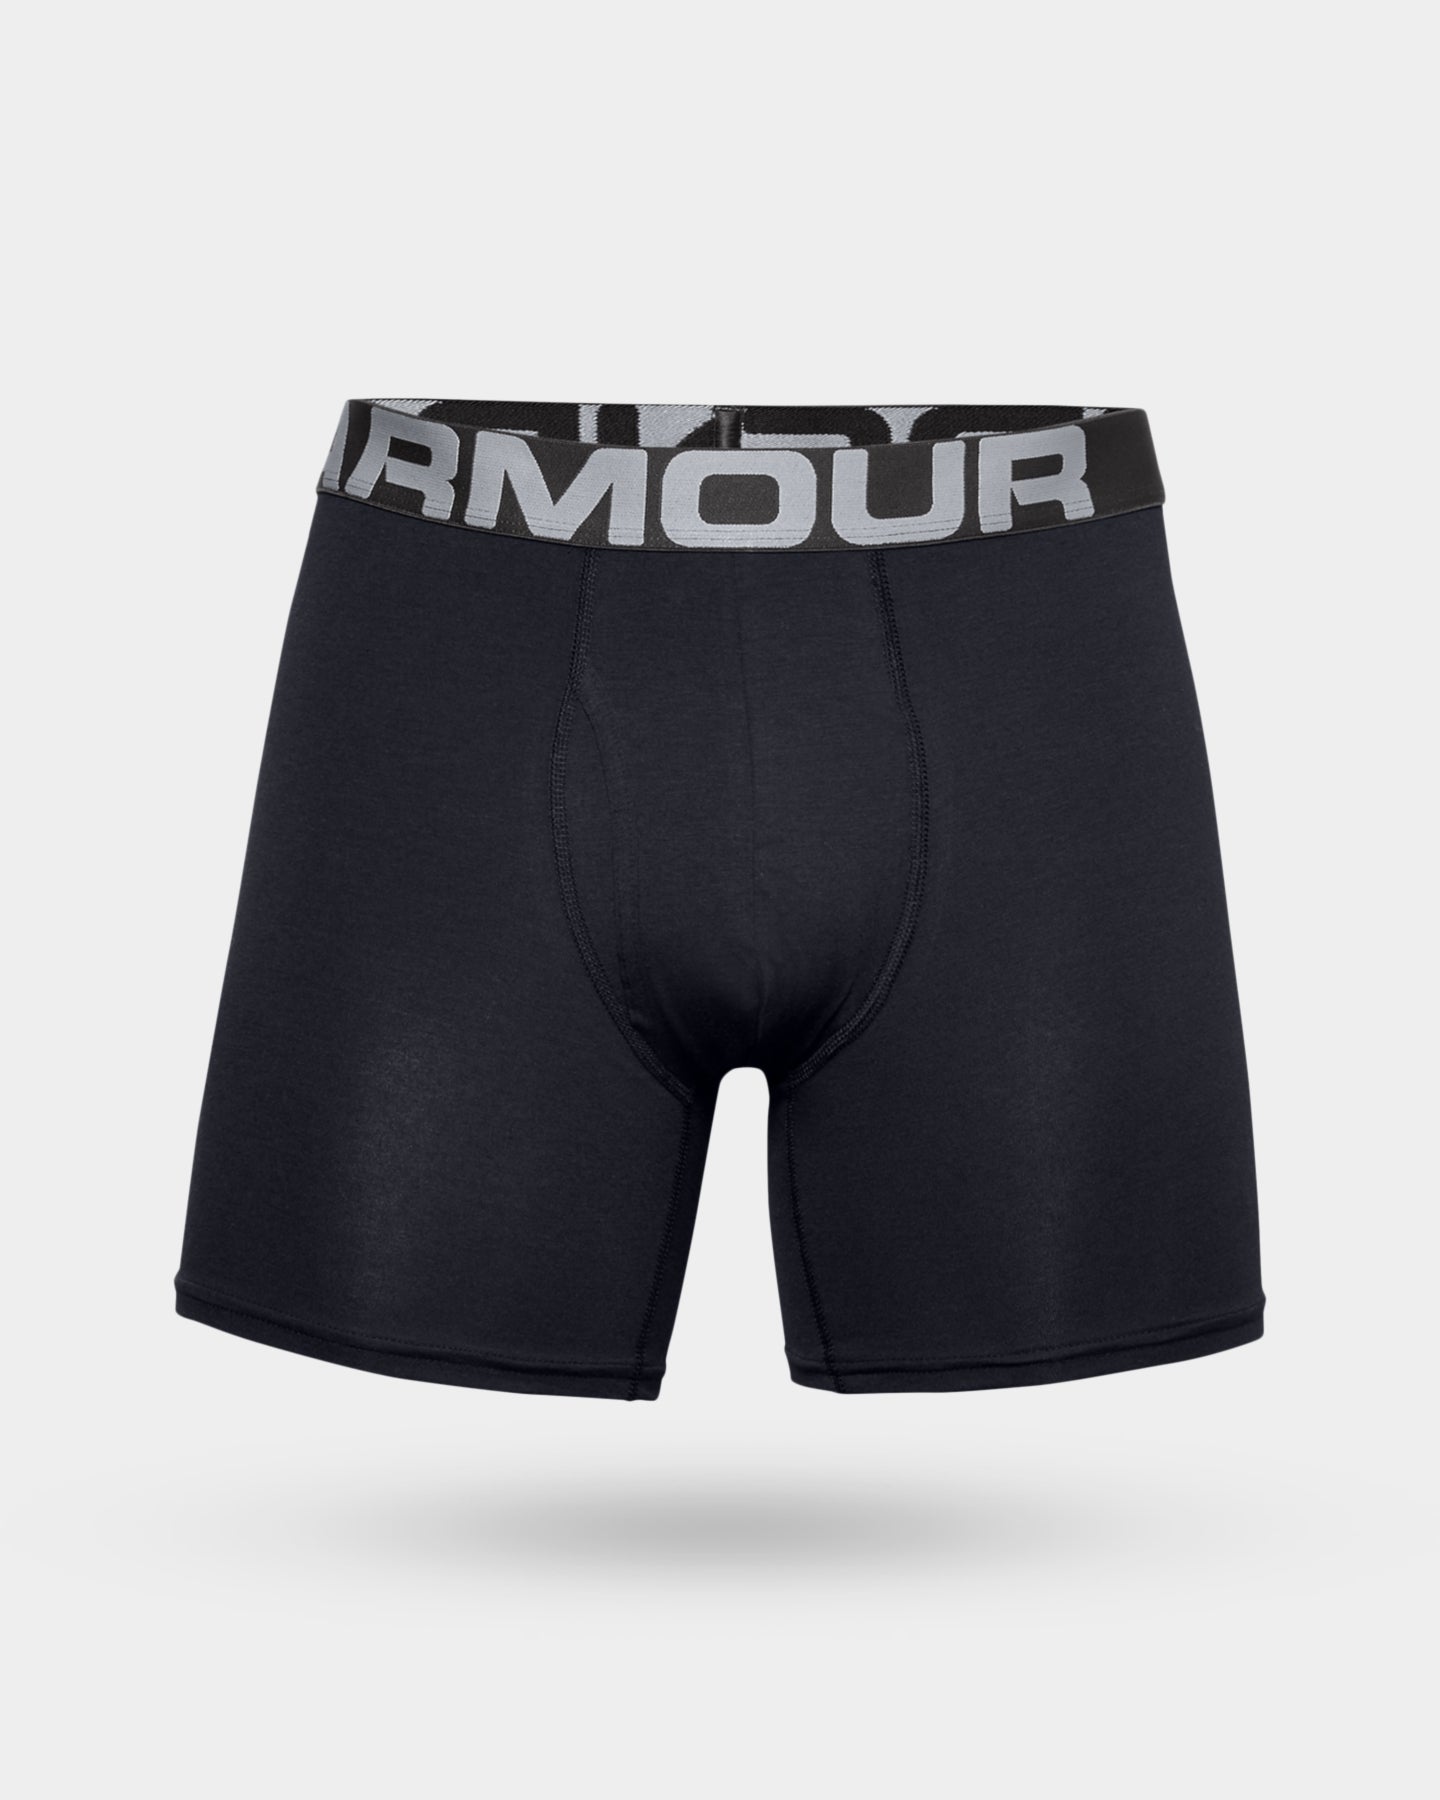 Under Armour Charged Cotton 6" 3-pk, Black, 2XL A1